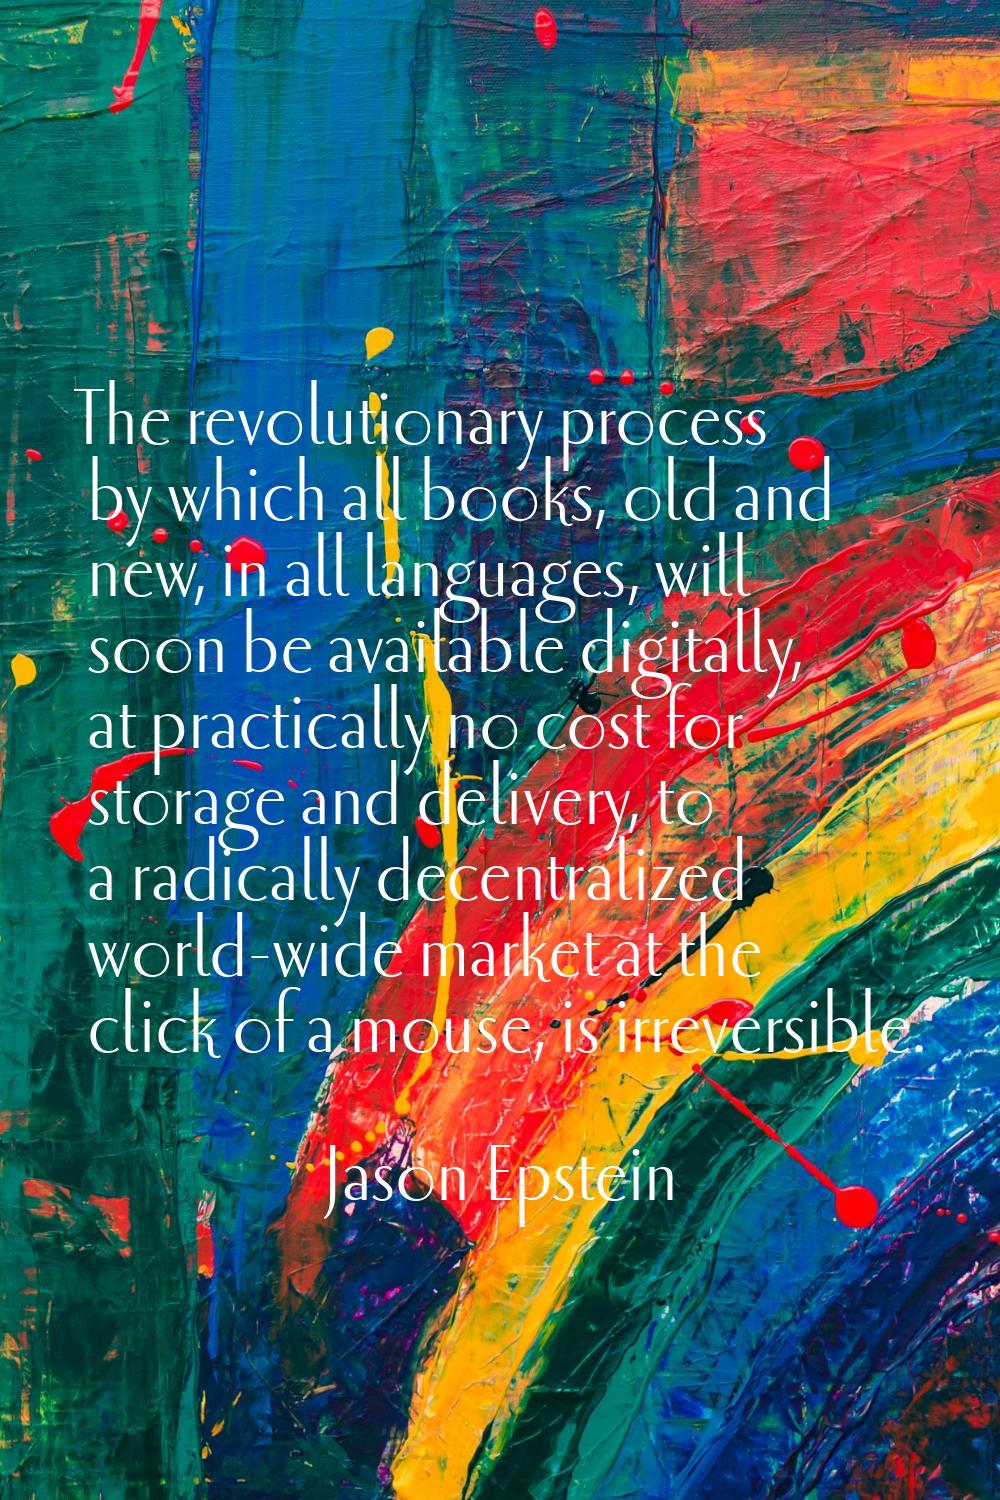 The revolutionary process by which all books, old and new, in all languages, will soon be available